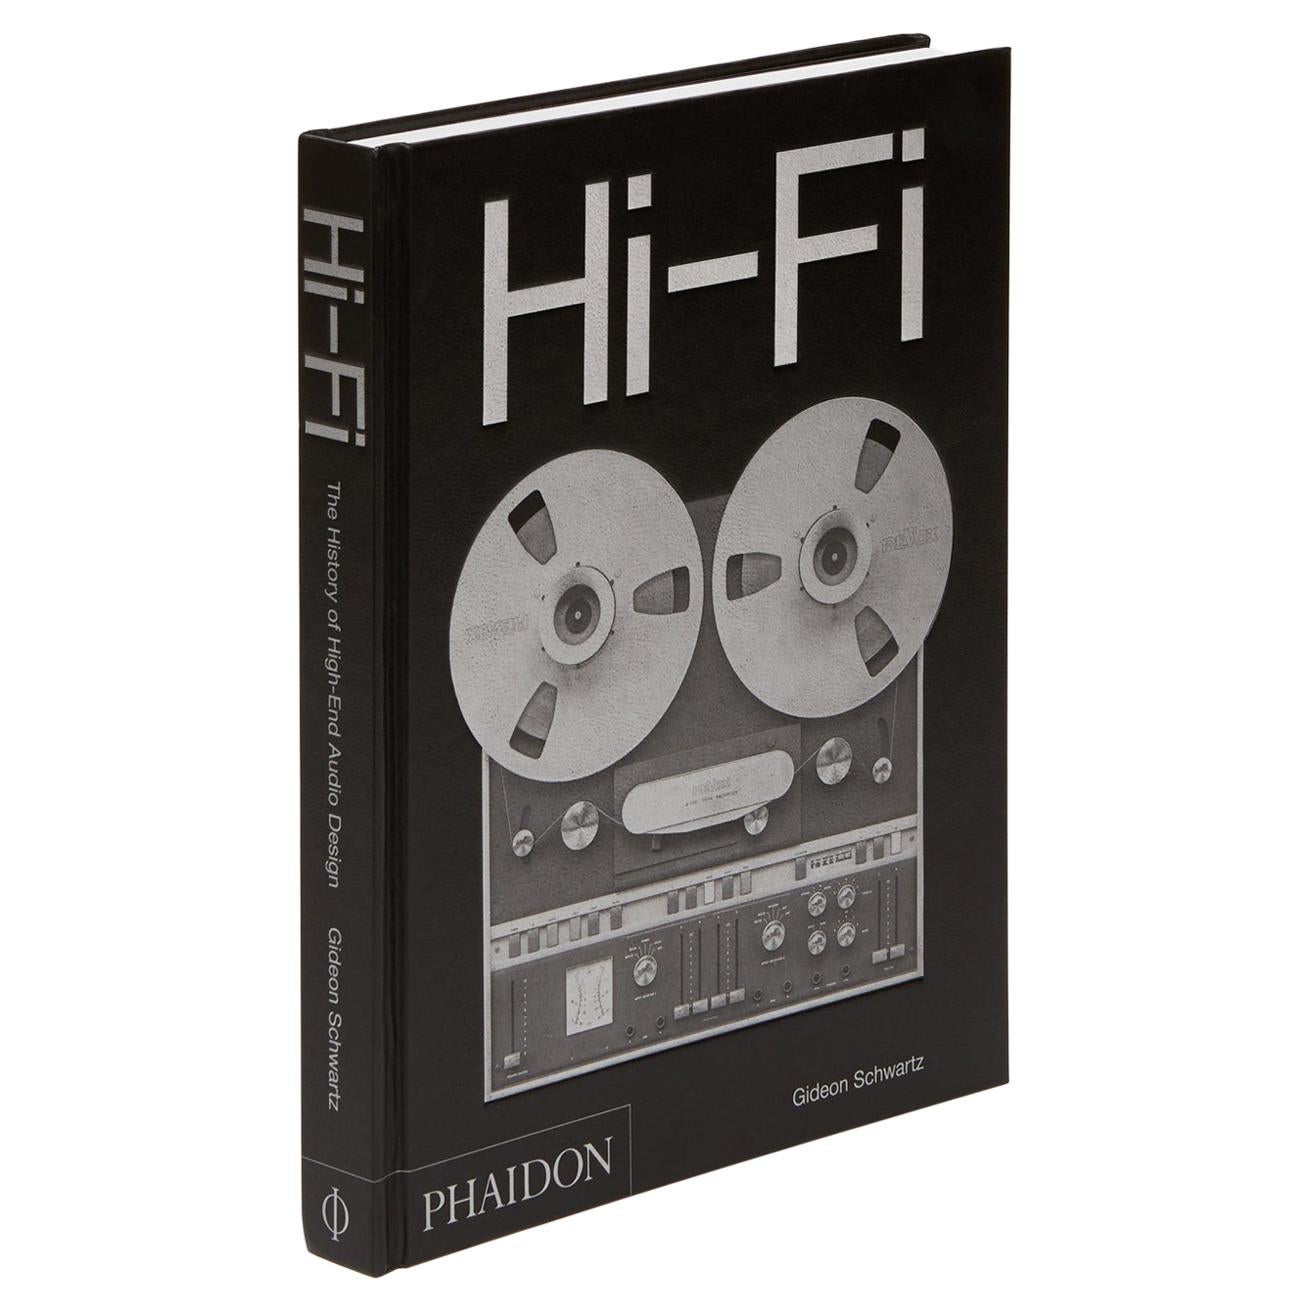 "Hi-Fi The History of High-End Audio Design" Book For Sale